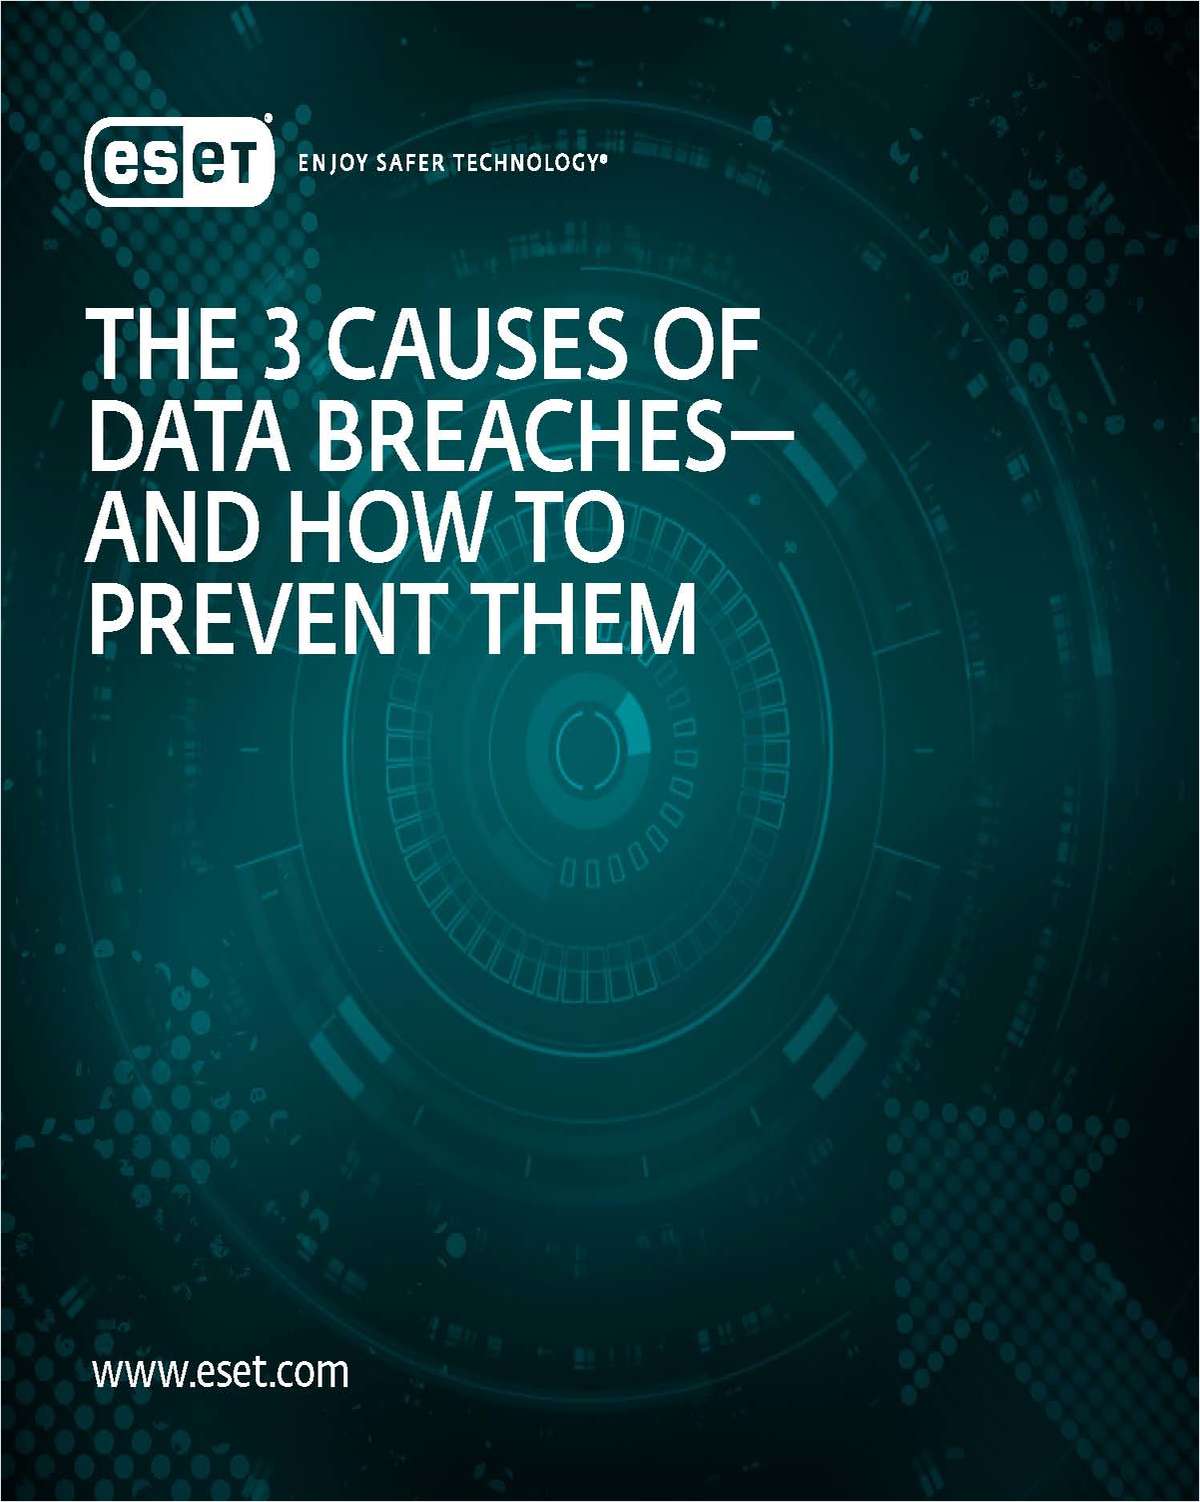 The 3 Causes of Data Breaches and How to Prevent Them